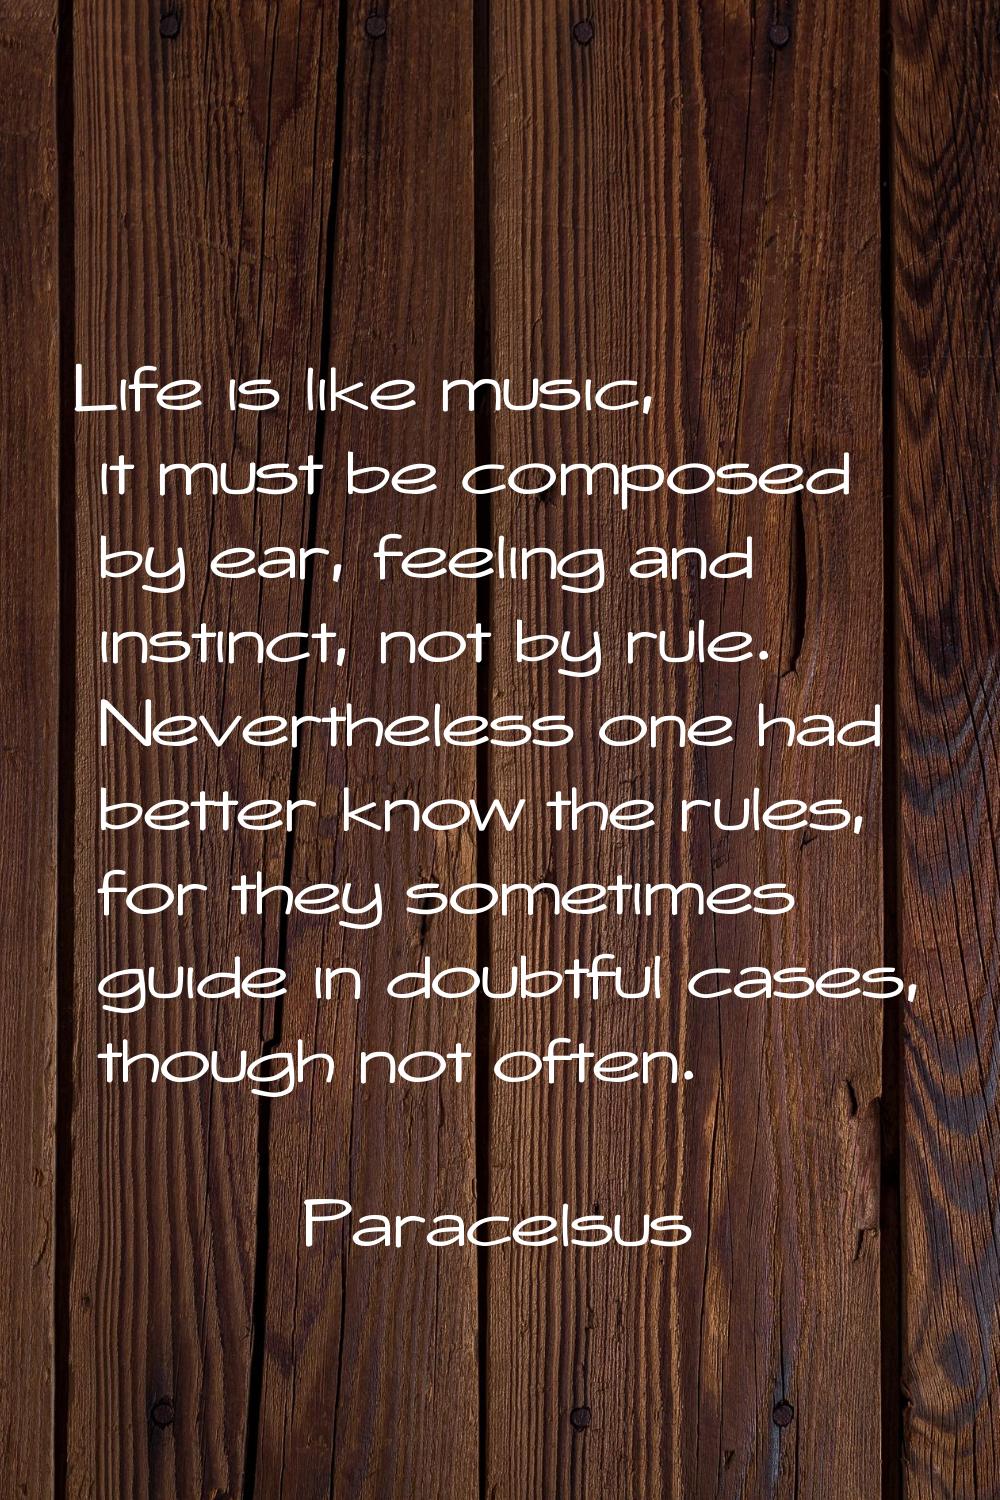 Life is like music, it must be composed by ear, feeling and instinct, not by rule. Nevertheless one